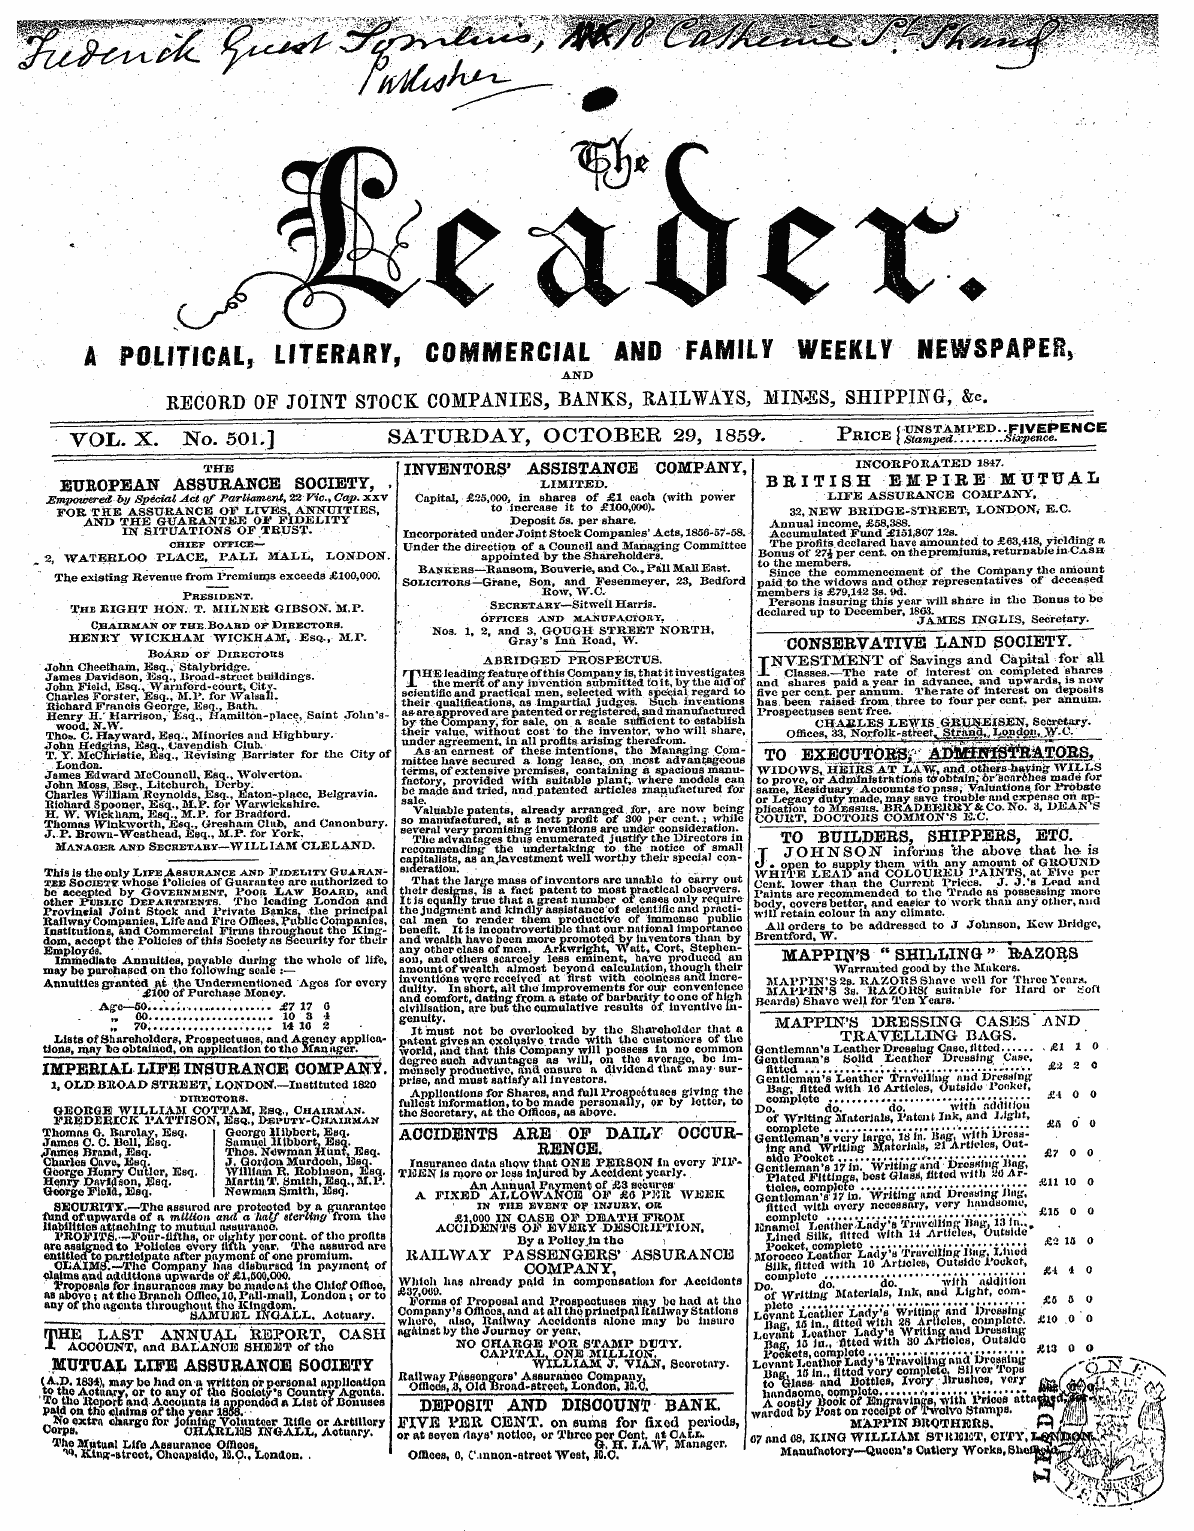 Leader (1850-1860): jS F Y, 2nd edition - Ad00107